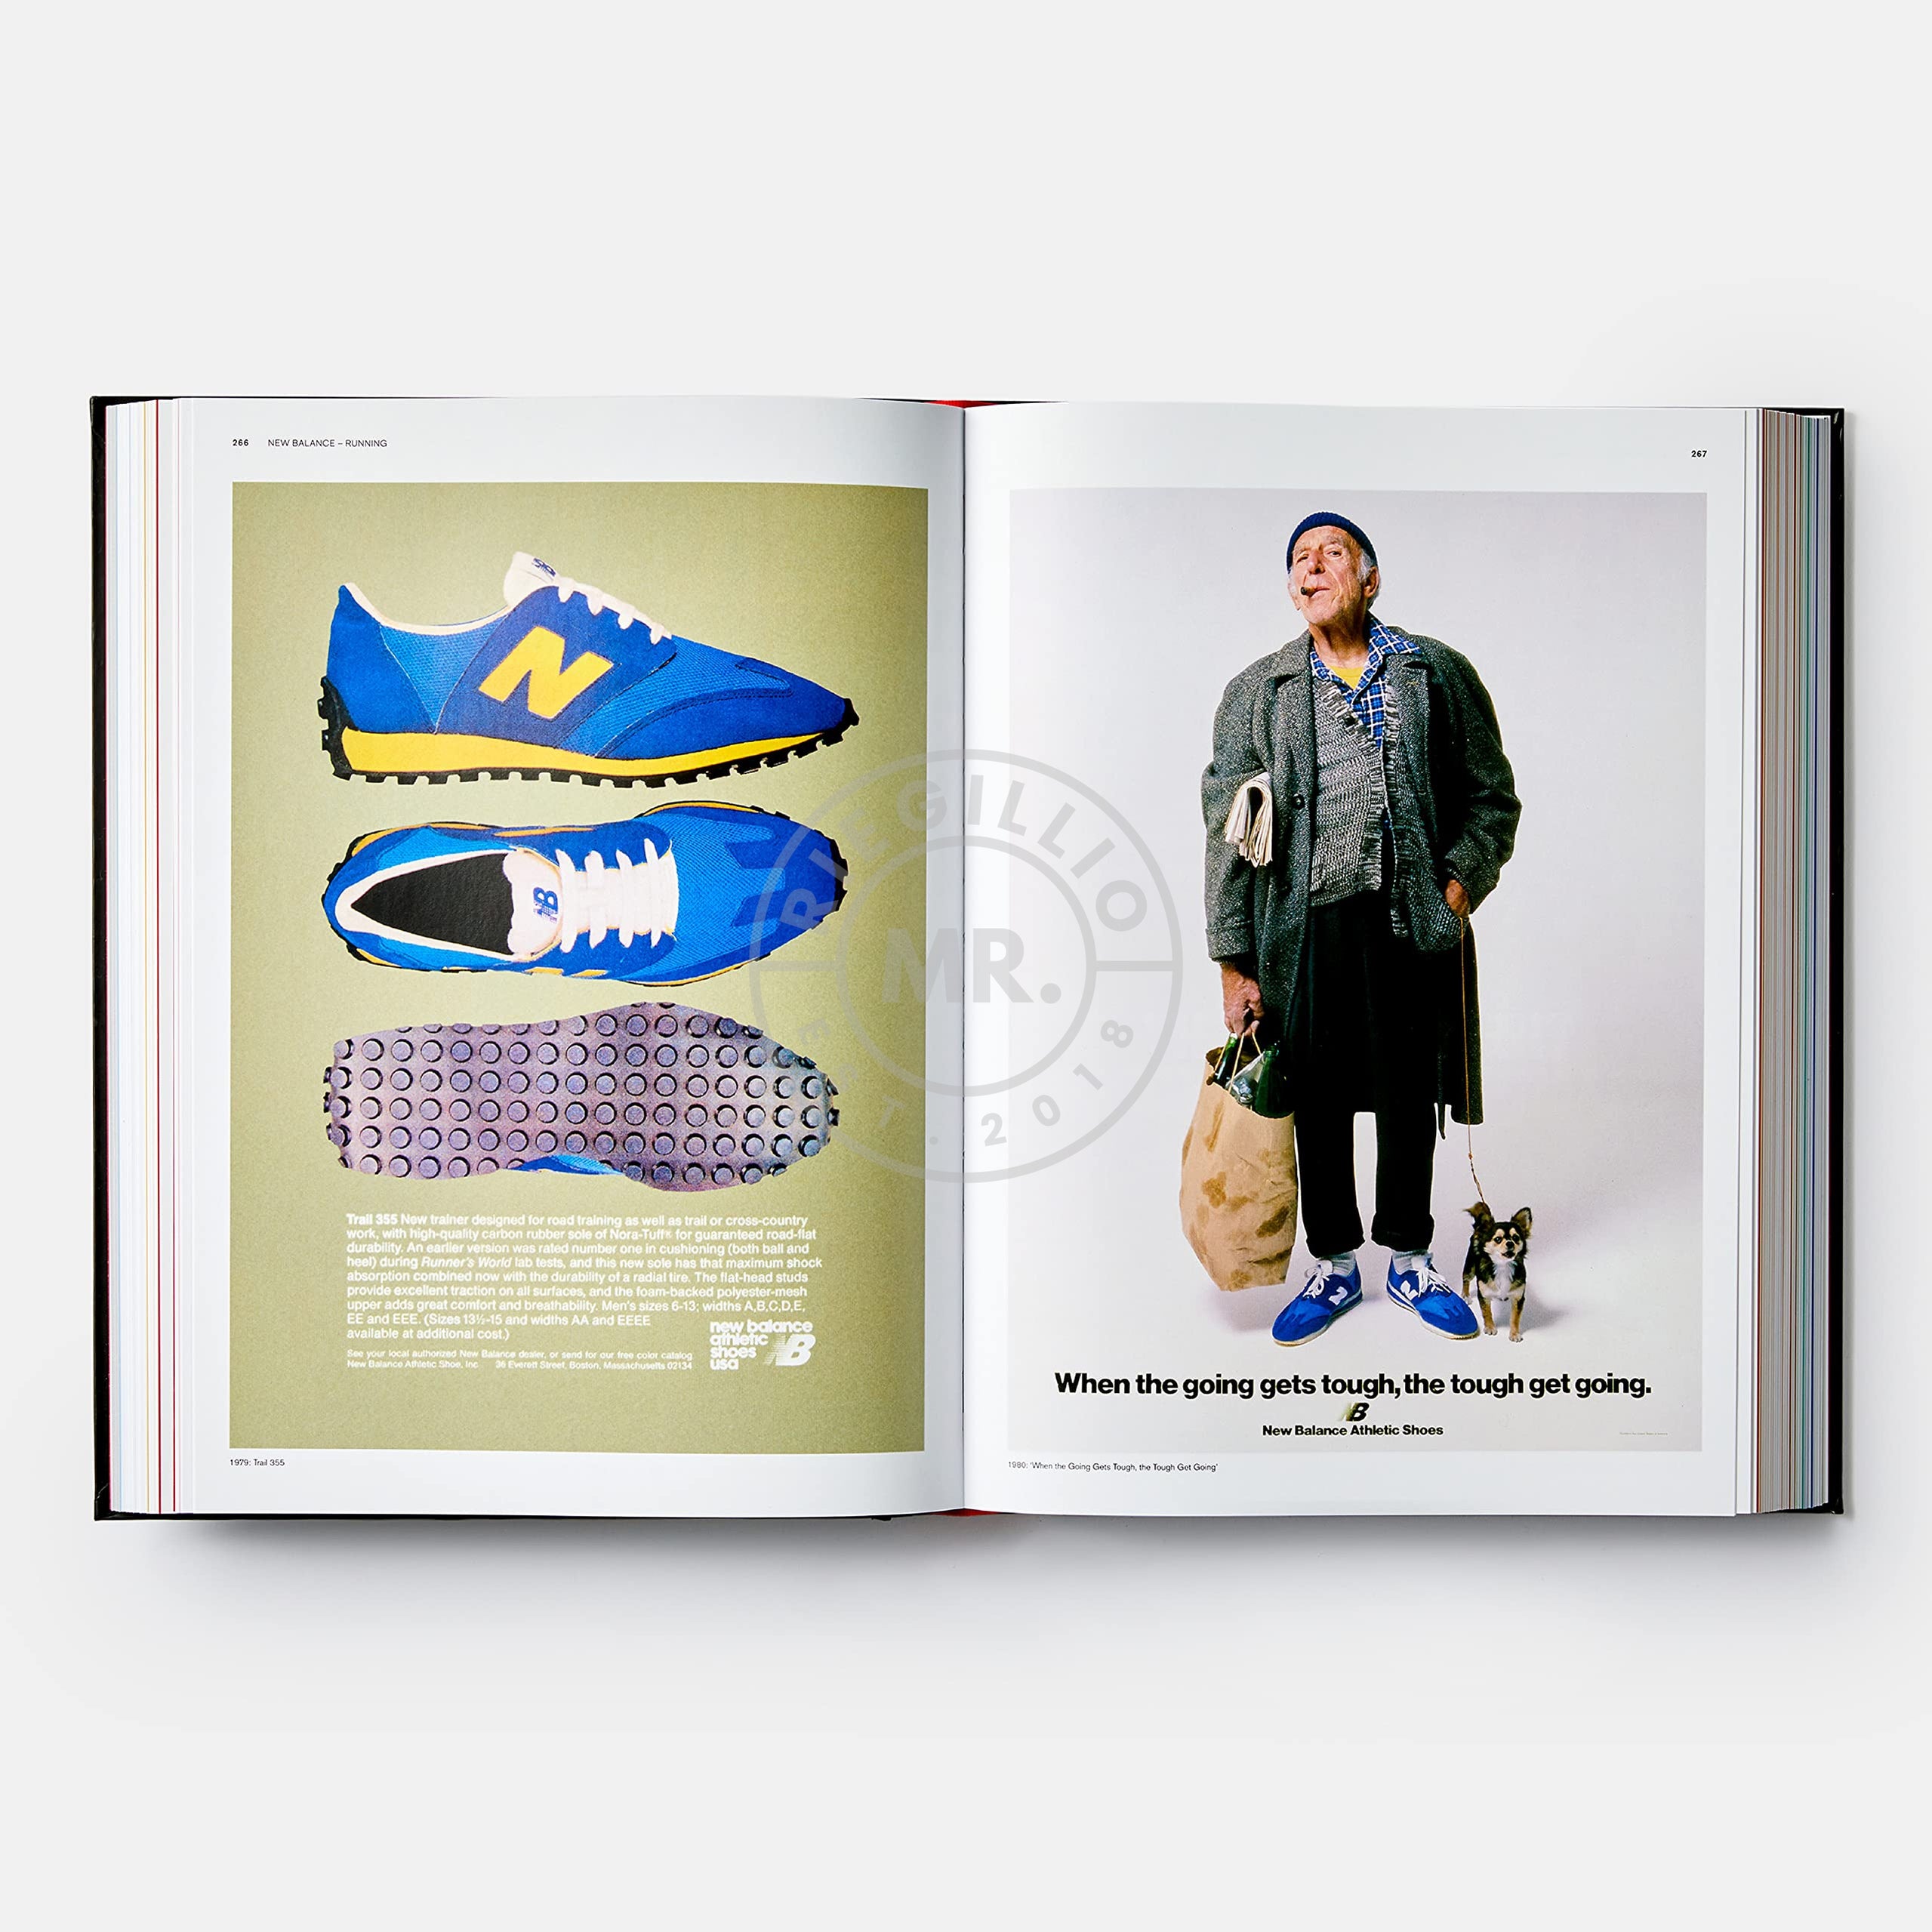 Table Book Sneaker Freaker – SOLED OUT: The Golden Age of Sneaker Advertising-at MR. Riegillio